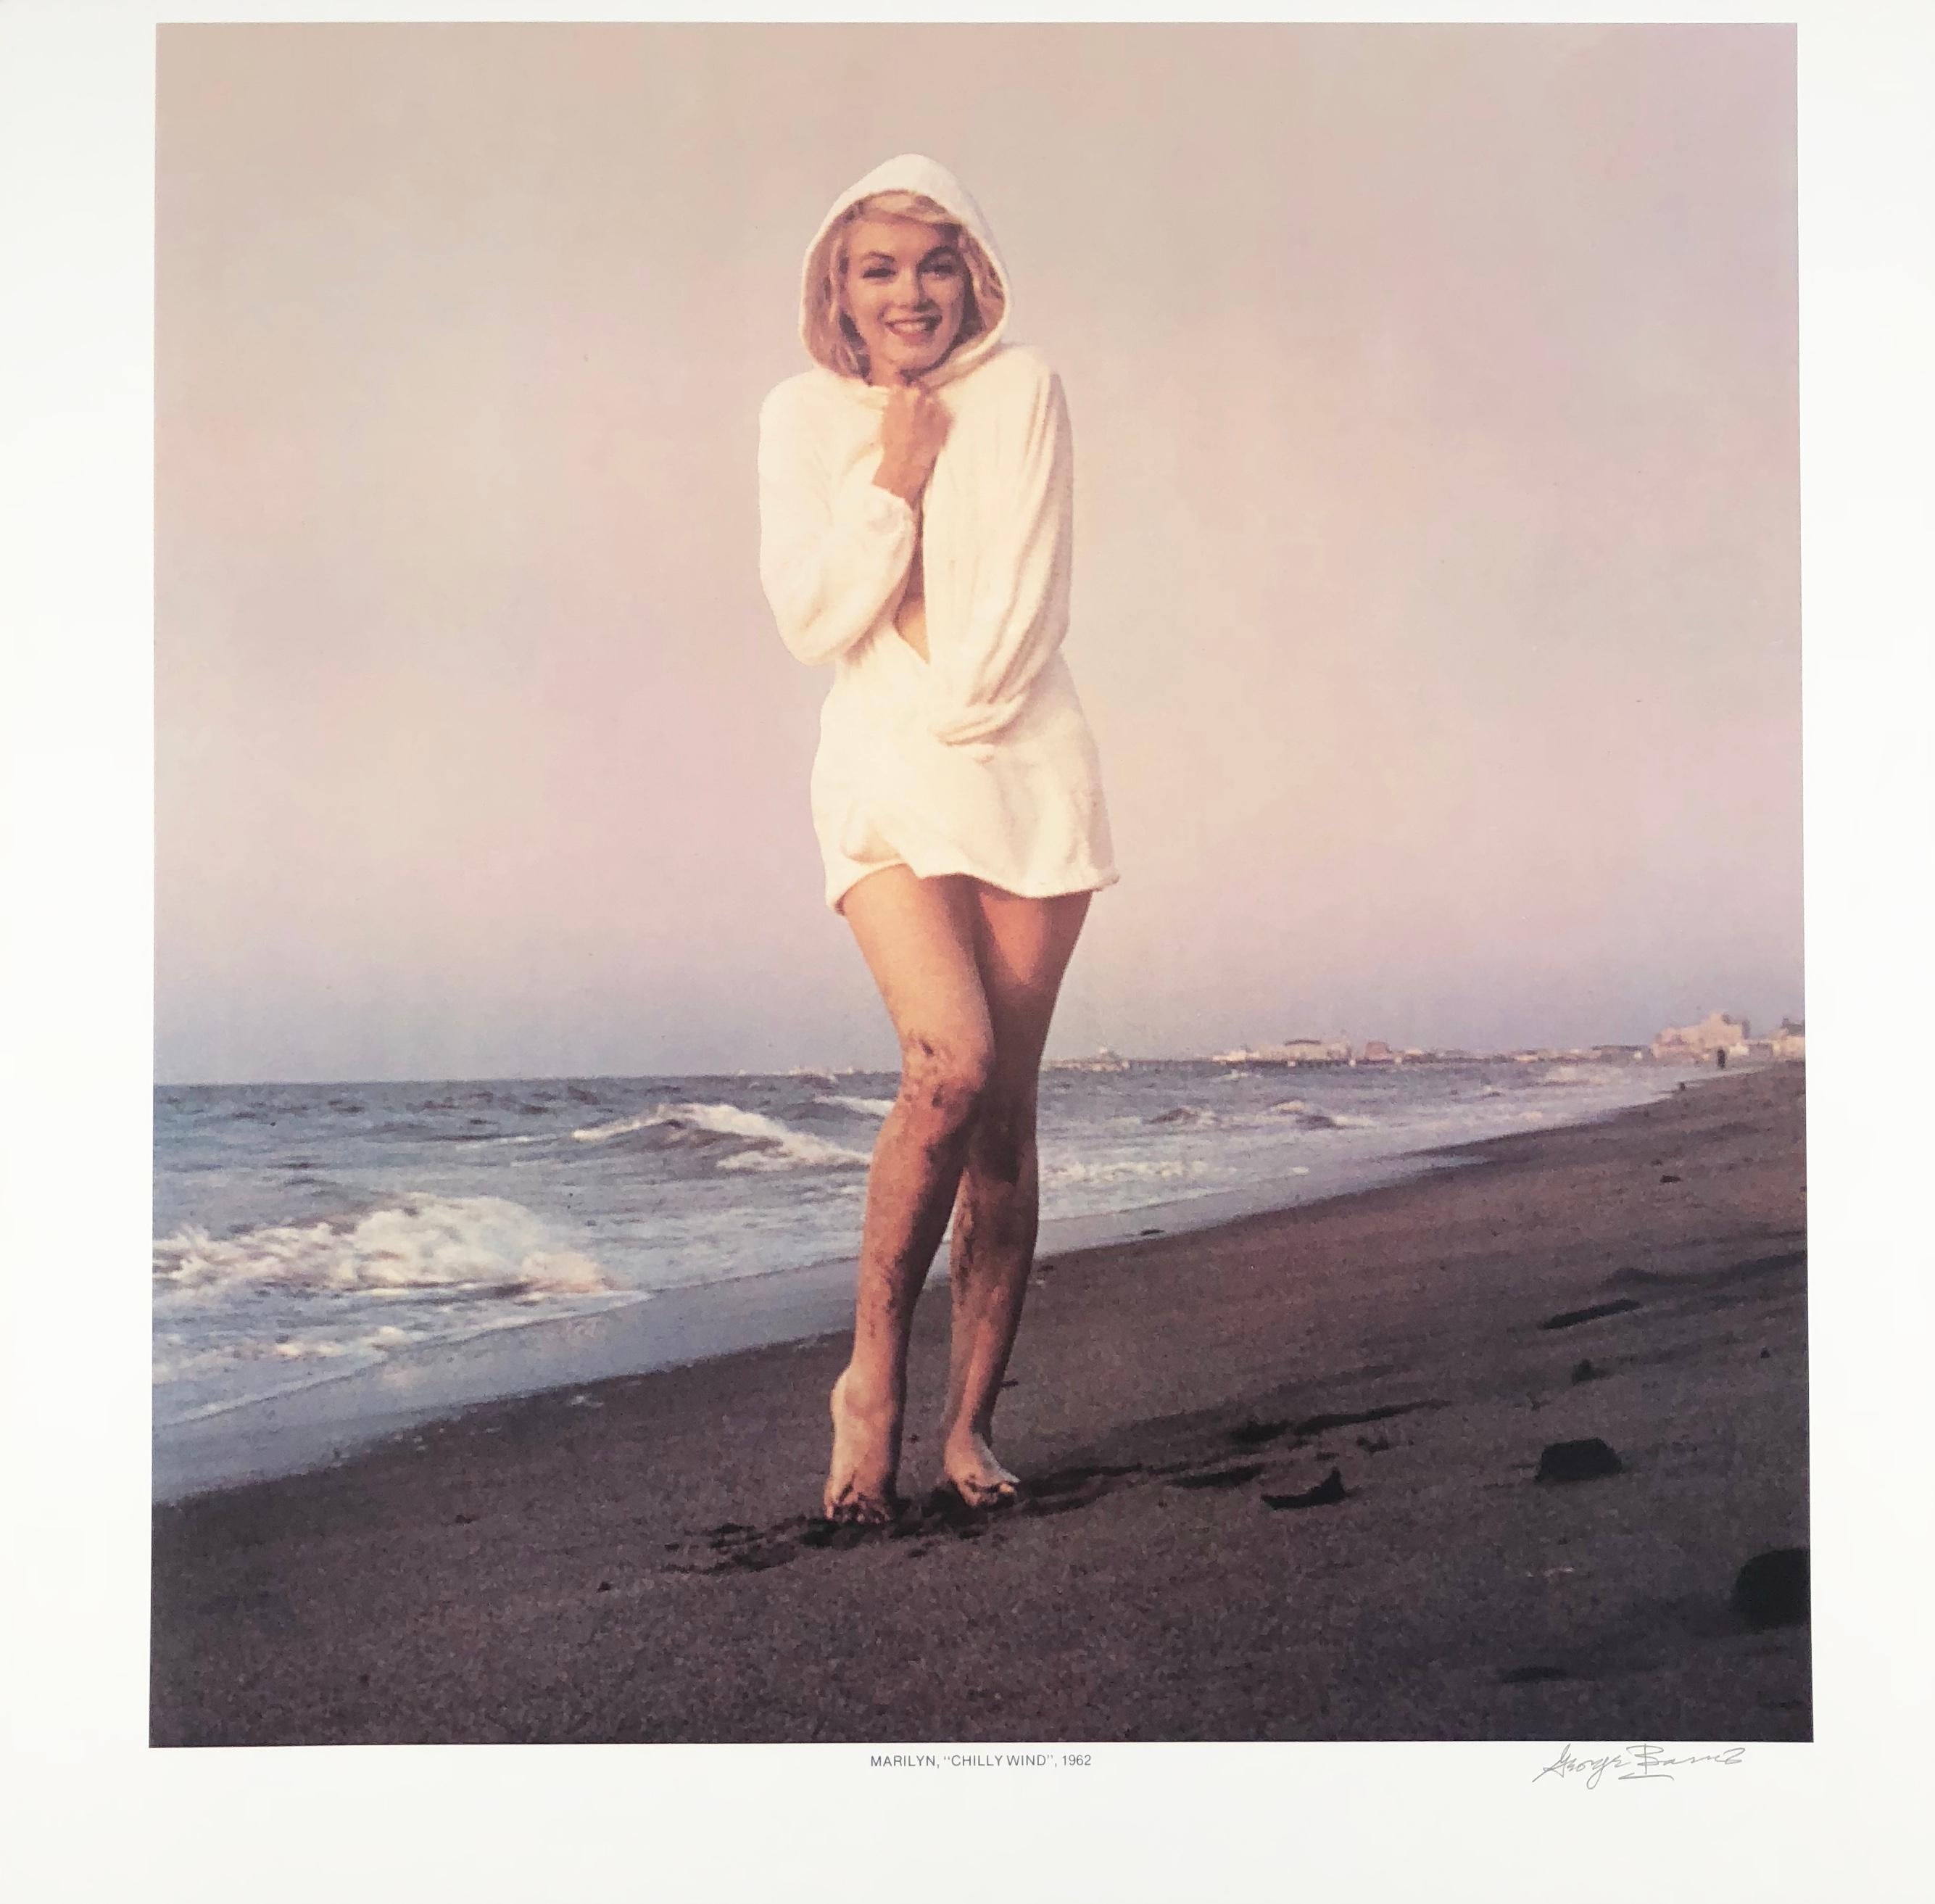 George Barris, „Chilly Wind“, Fotolithographie, handsigniert